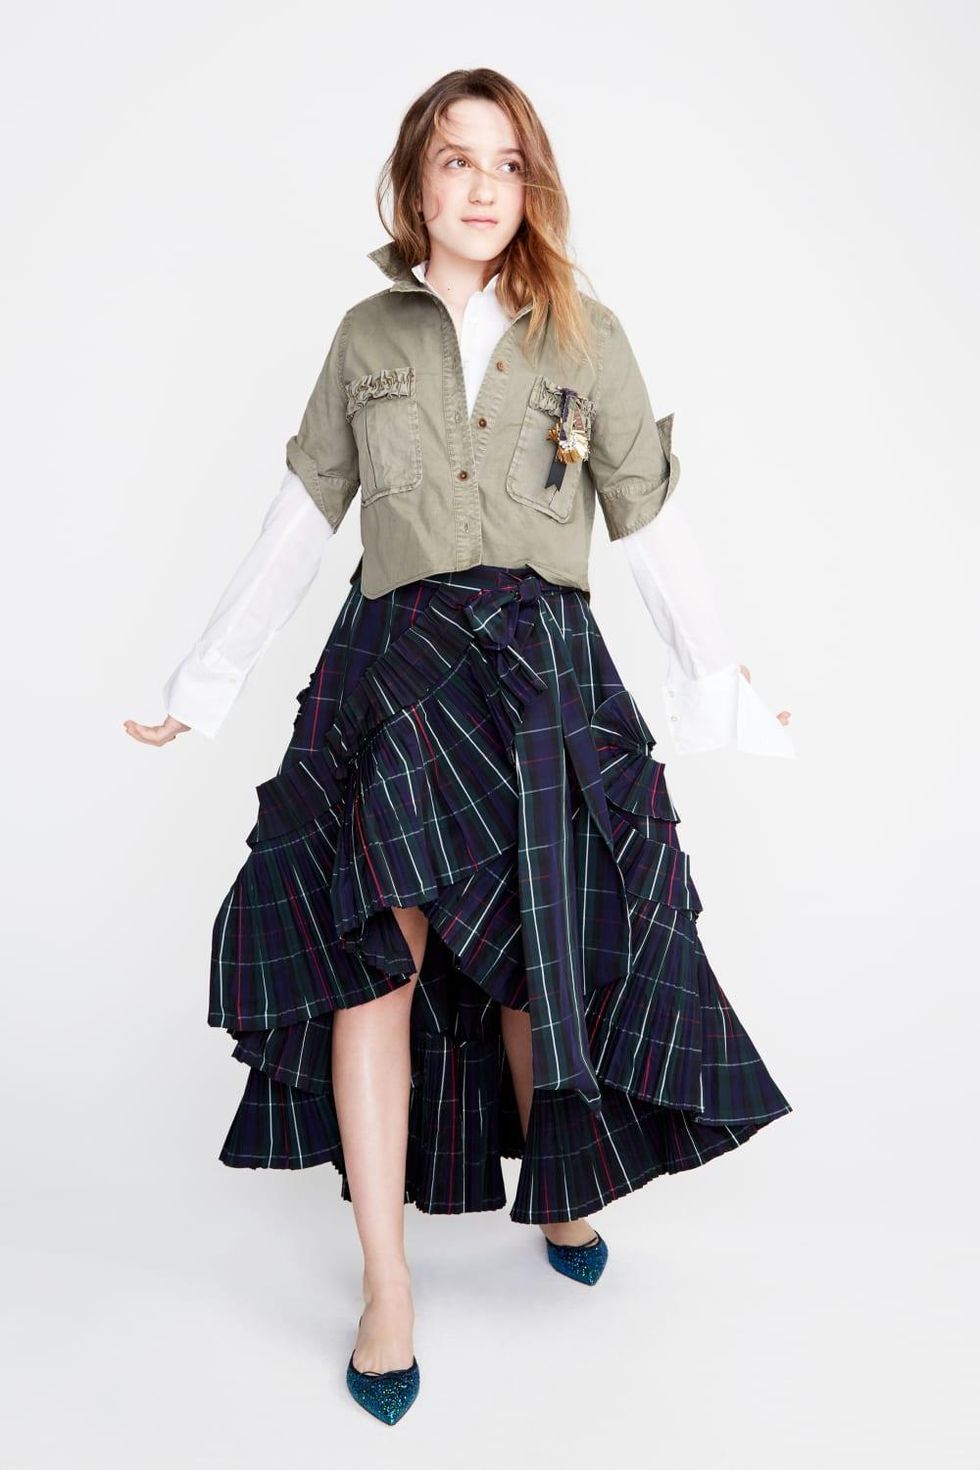 Mathilda Gianopoulos, daughter of Molly Ringwald, models J.Crew fall 2017